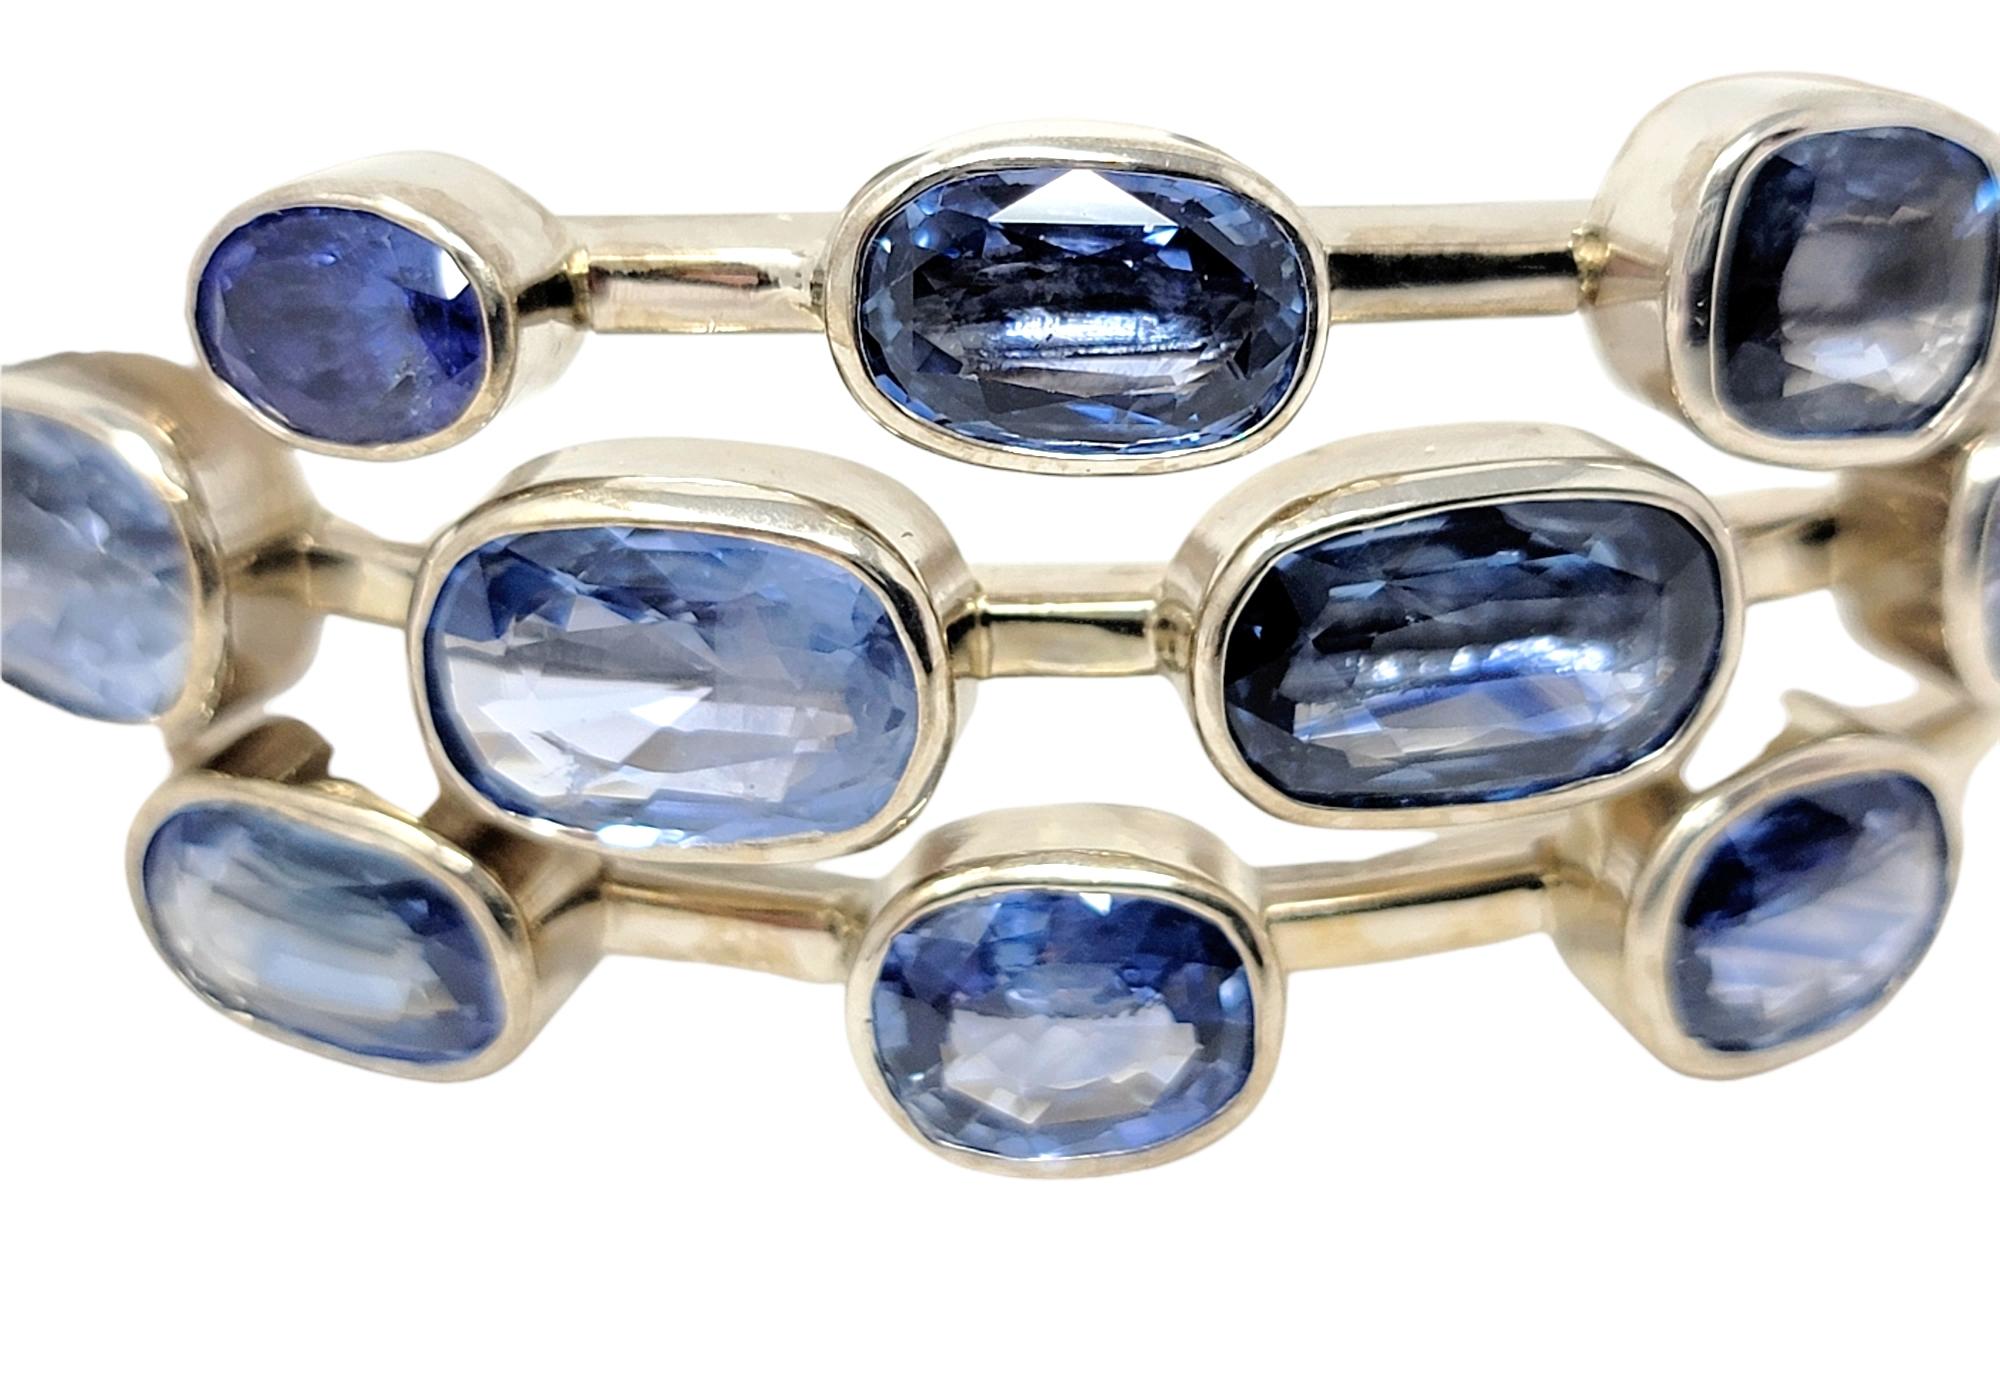 If blue is your color, than this is the bracelet for you! Absolutely stunning, one-of-a-kind blue gemstone bangle filled with 10 colorful stones, all in a slightly different shade of blue. 9 natural sapphires and 1 tanzanite stone are all bezel set